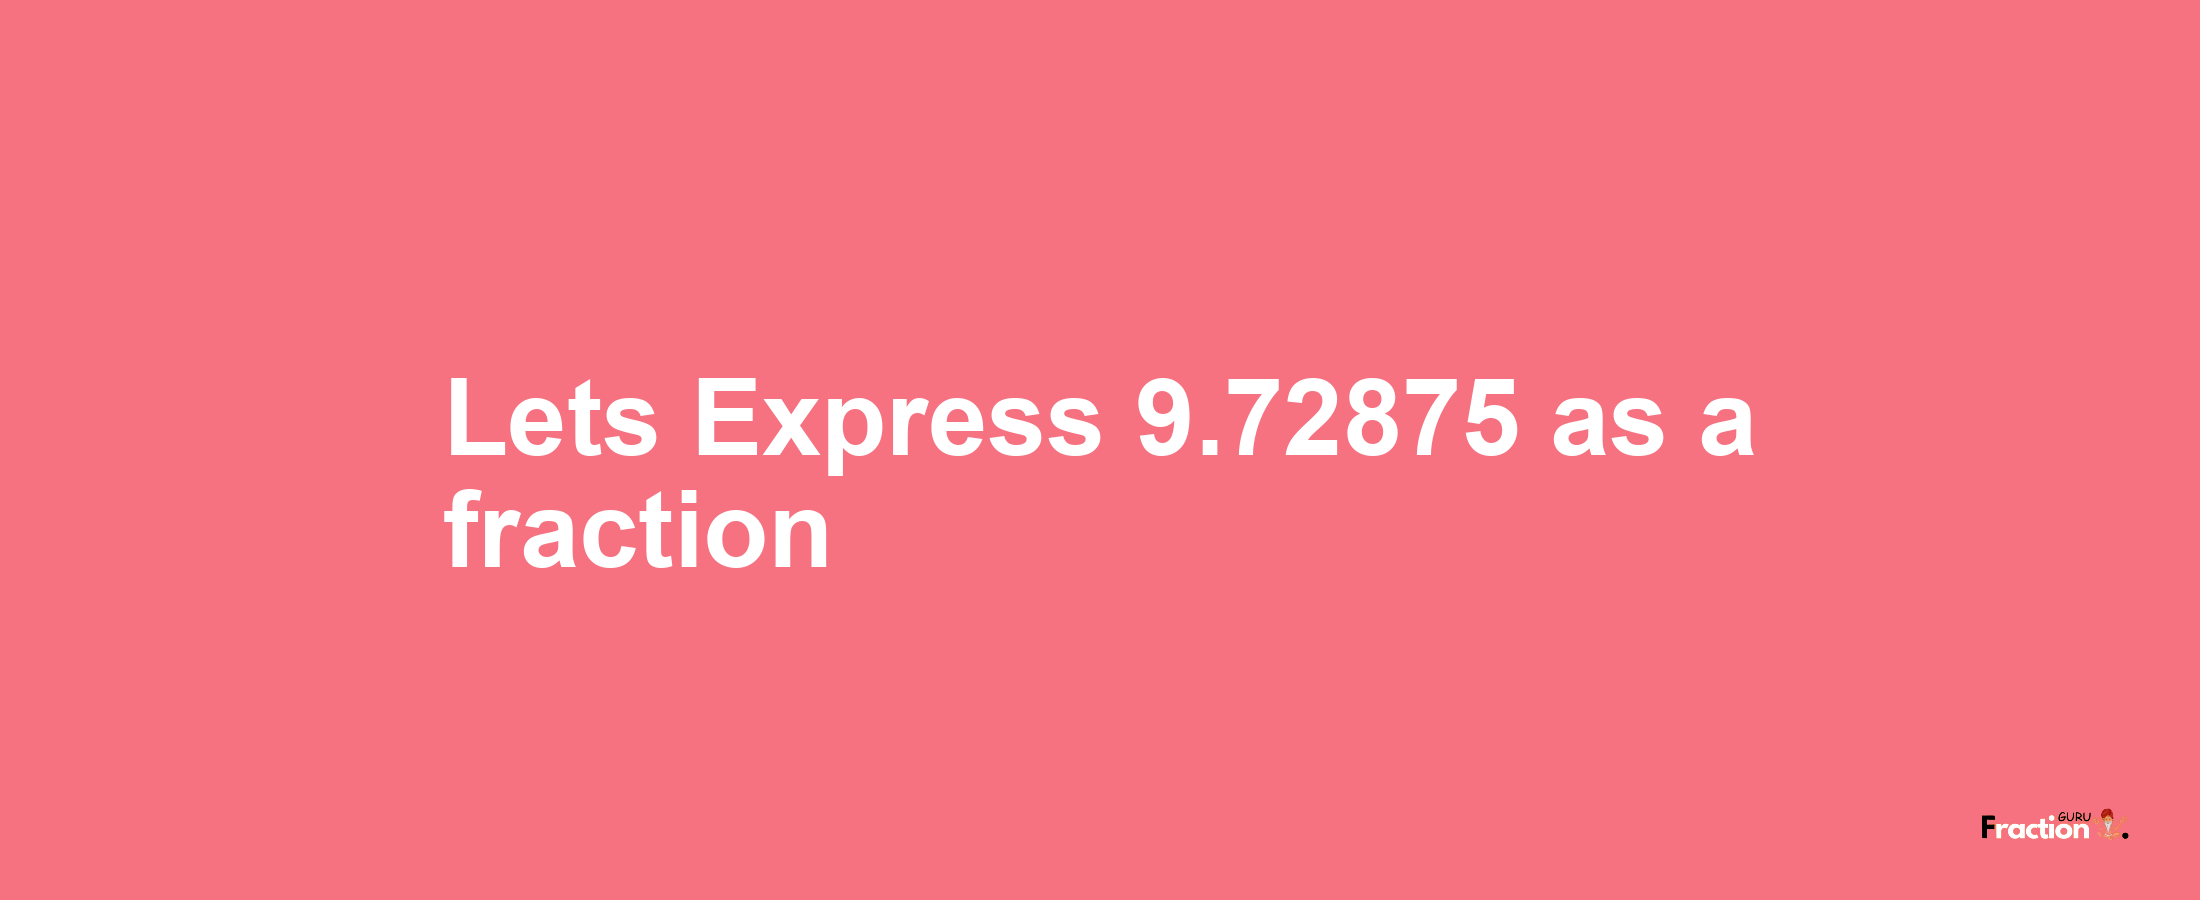 Lets Express 9.72875 as afraction